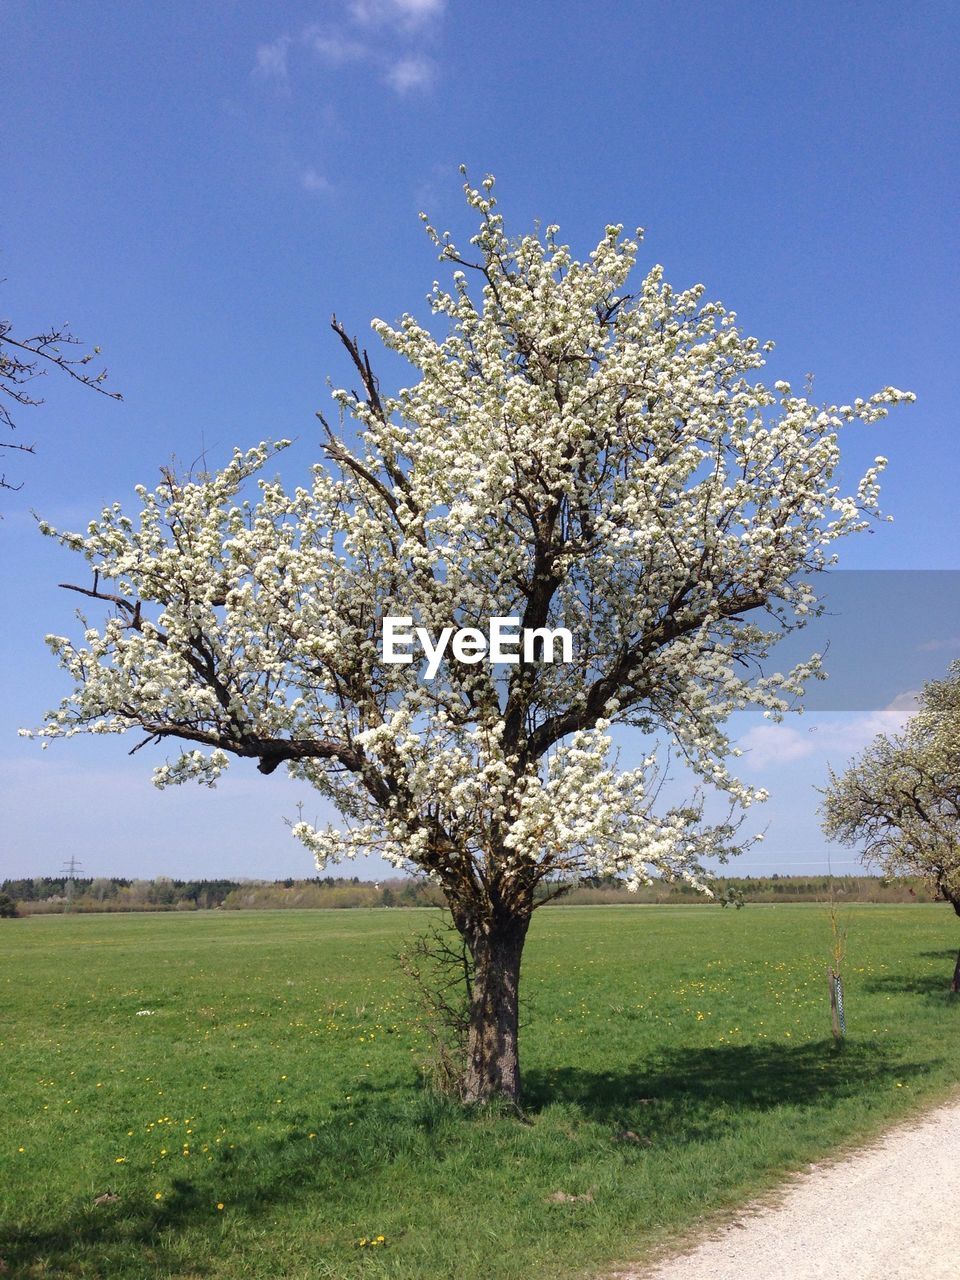 Tree with white blossom in field